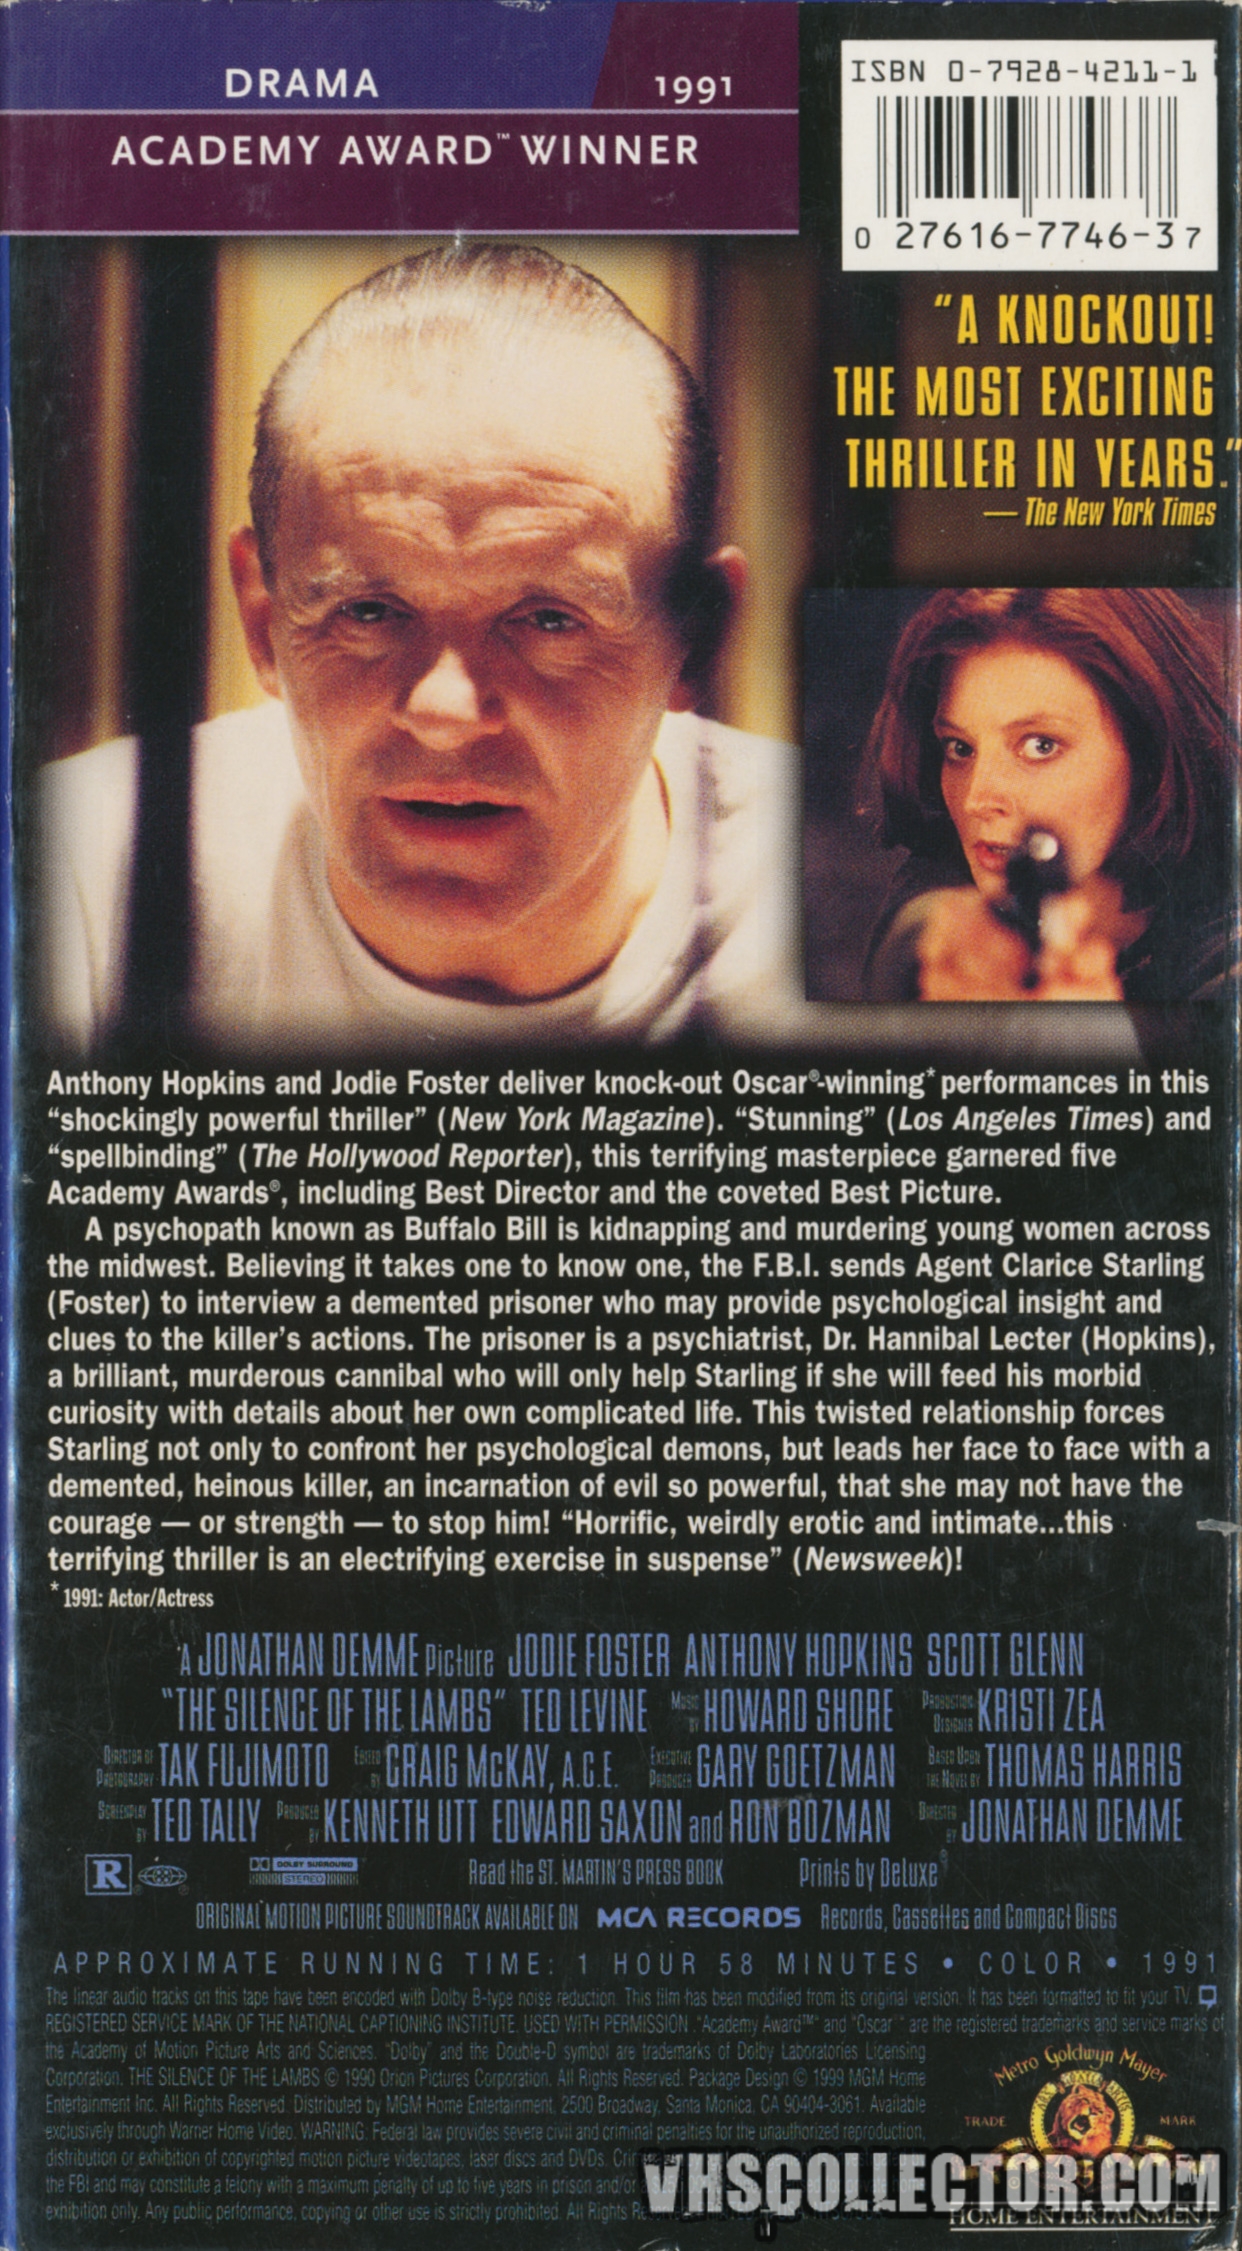 The Silence Of The Lambs | VHSCollector.com